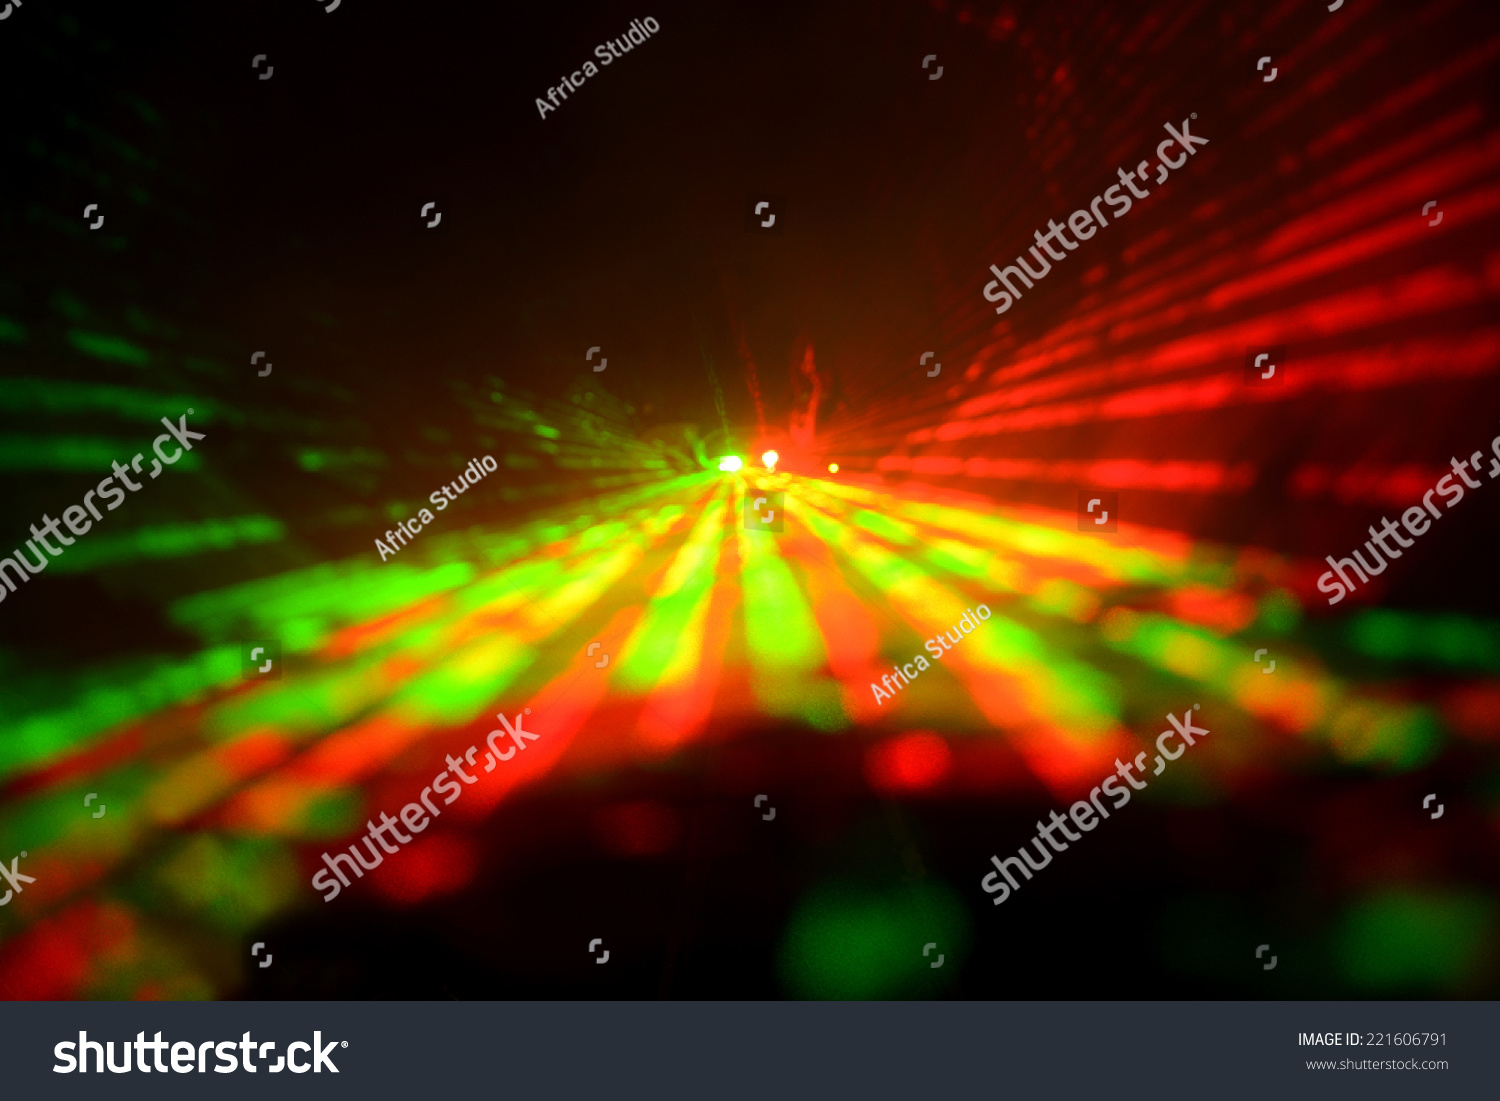 Abstract Laser Light On Black Background Stock Photo 221606791 ...